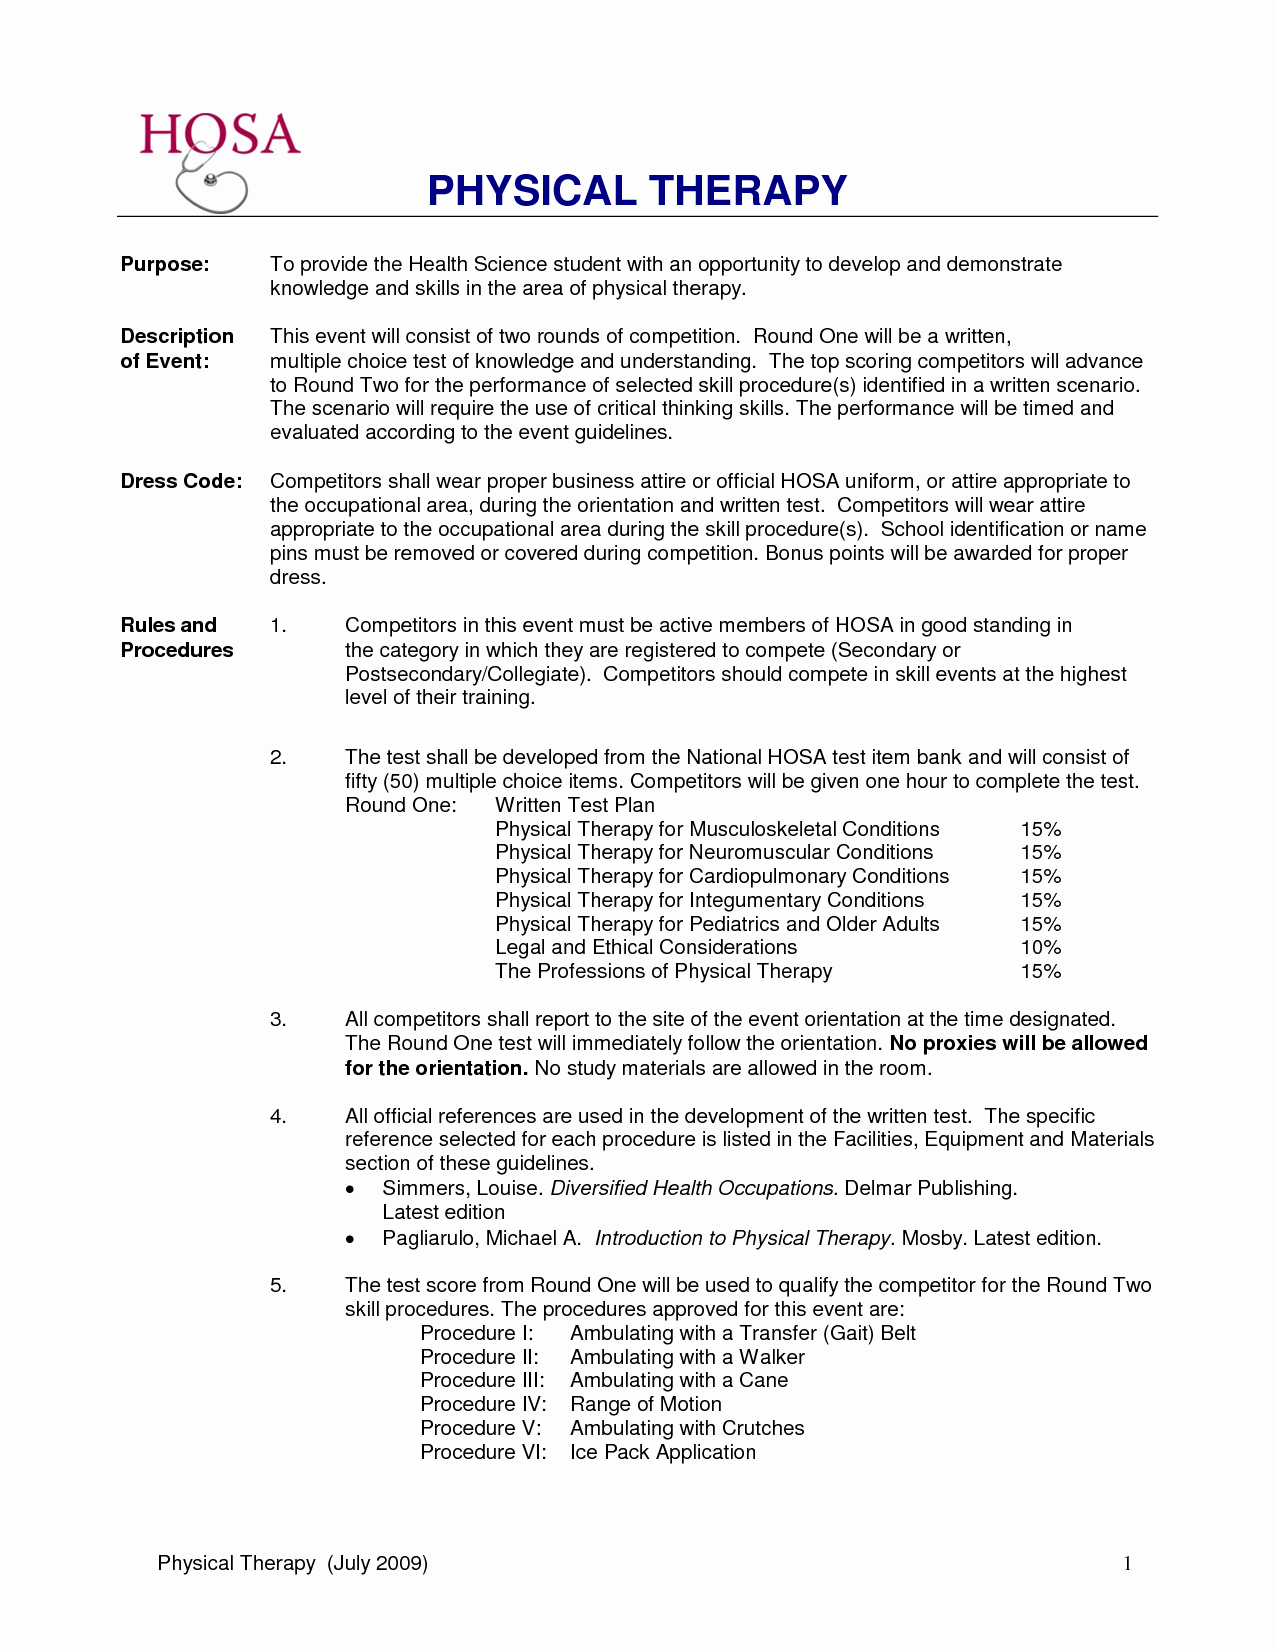 Good Physical therapy Technician Resume Sample